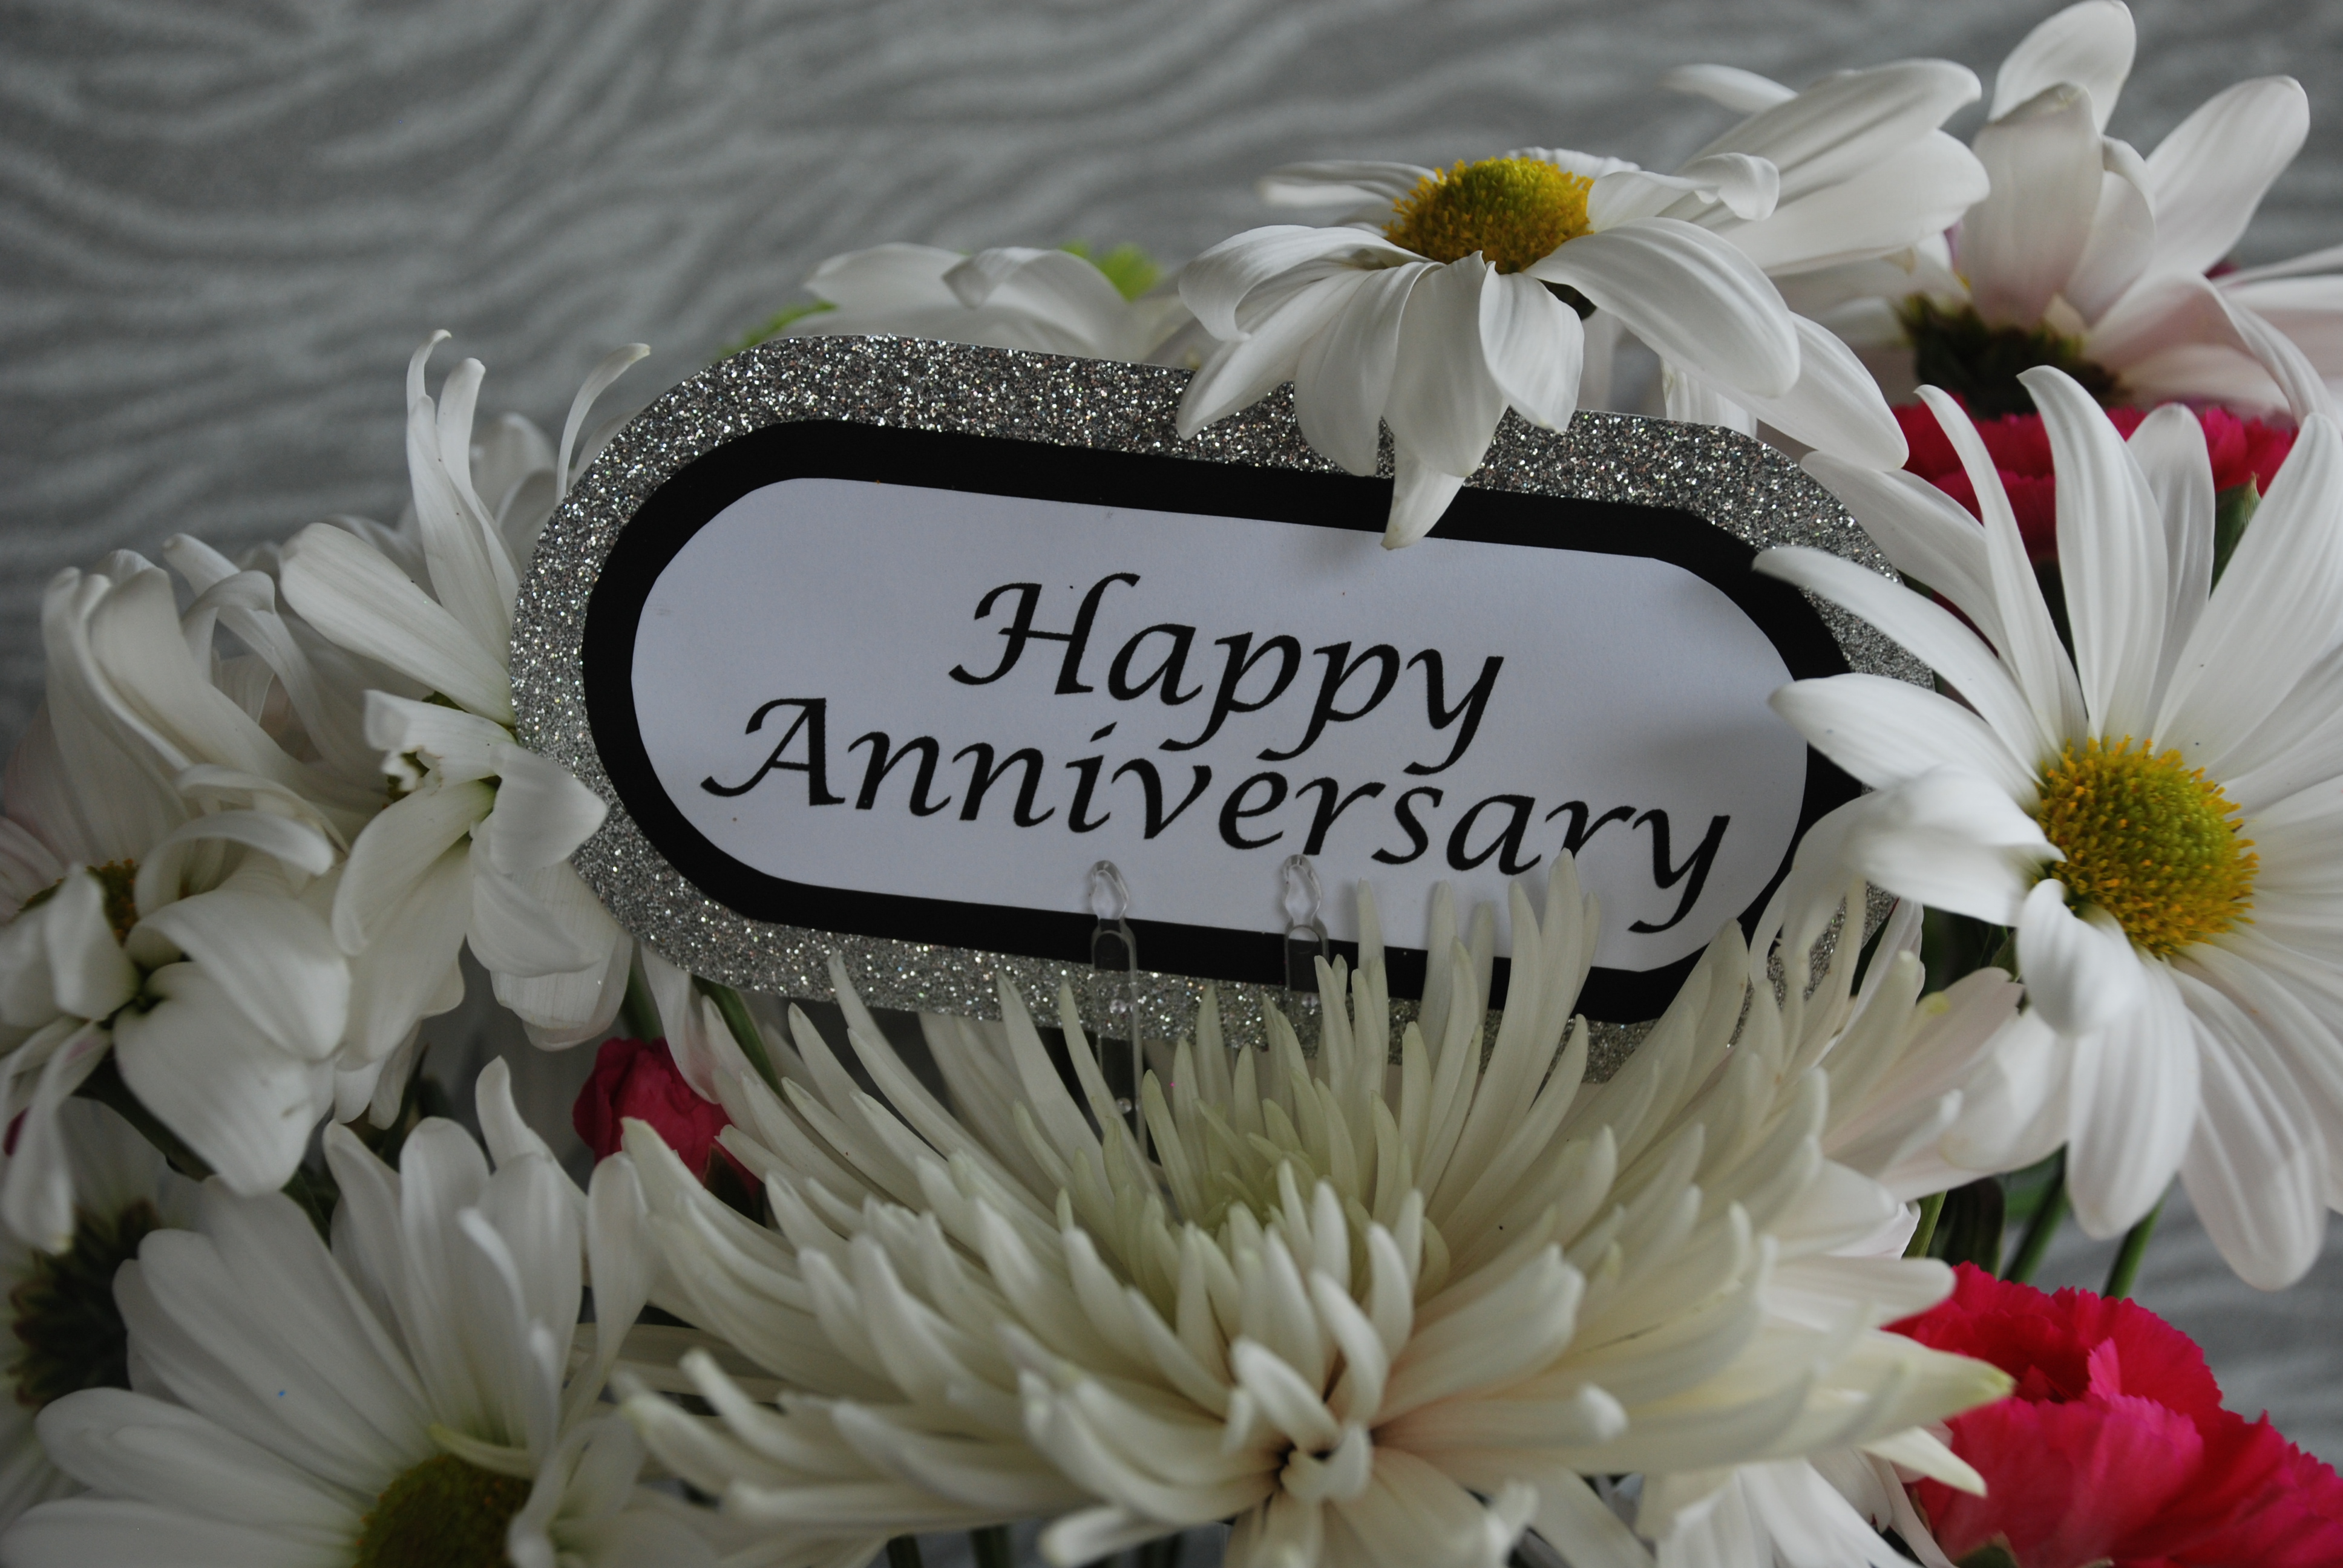 Free Download Happy Anniversary Wallpaper Wide Amazing T0112g3m81 3872x2592 For Your Desktop Mobile Tablet Explore 78 Happy Anniversary Wallpaper Christian Happy Anniversary Wallpaper Images Wedding Anniversary Wallpaper